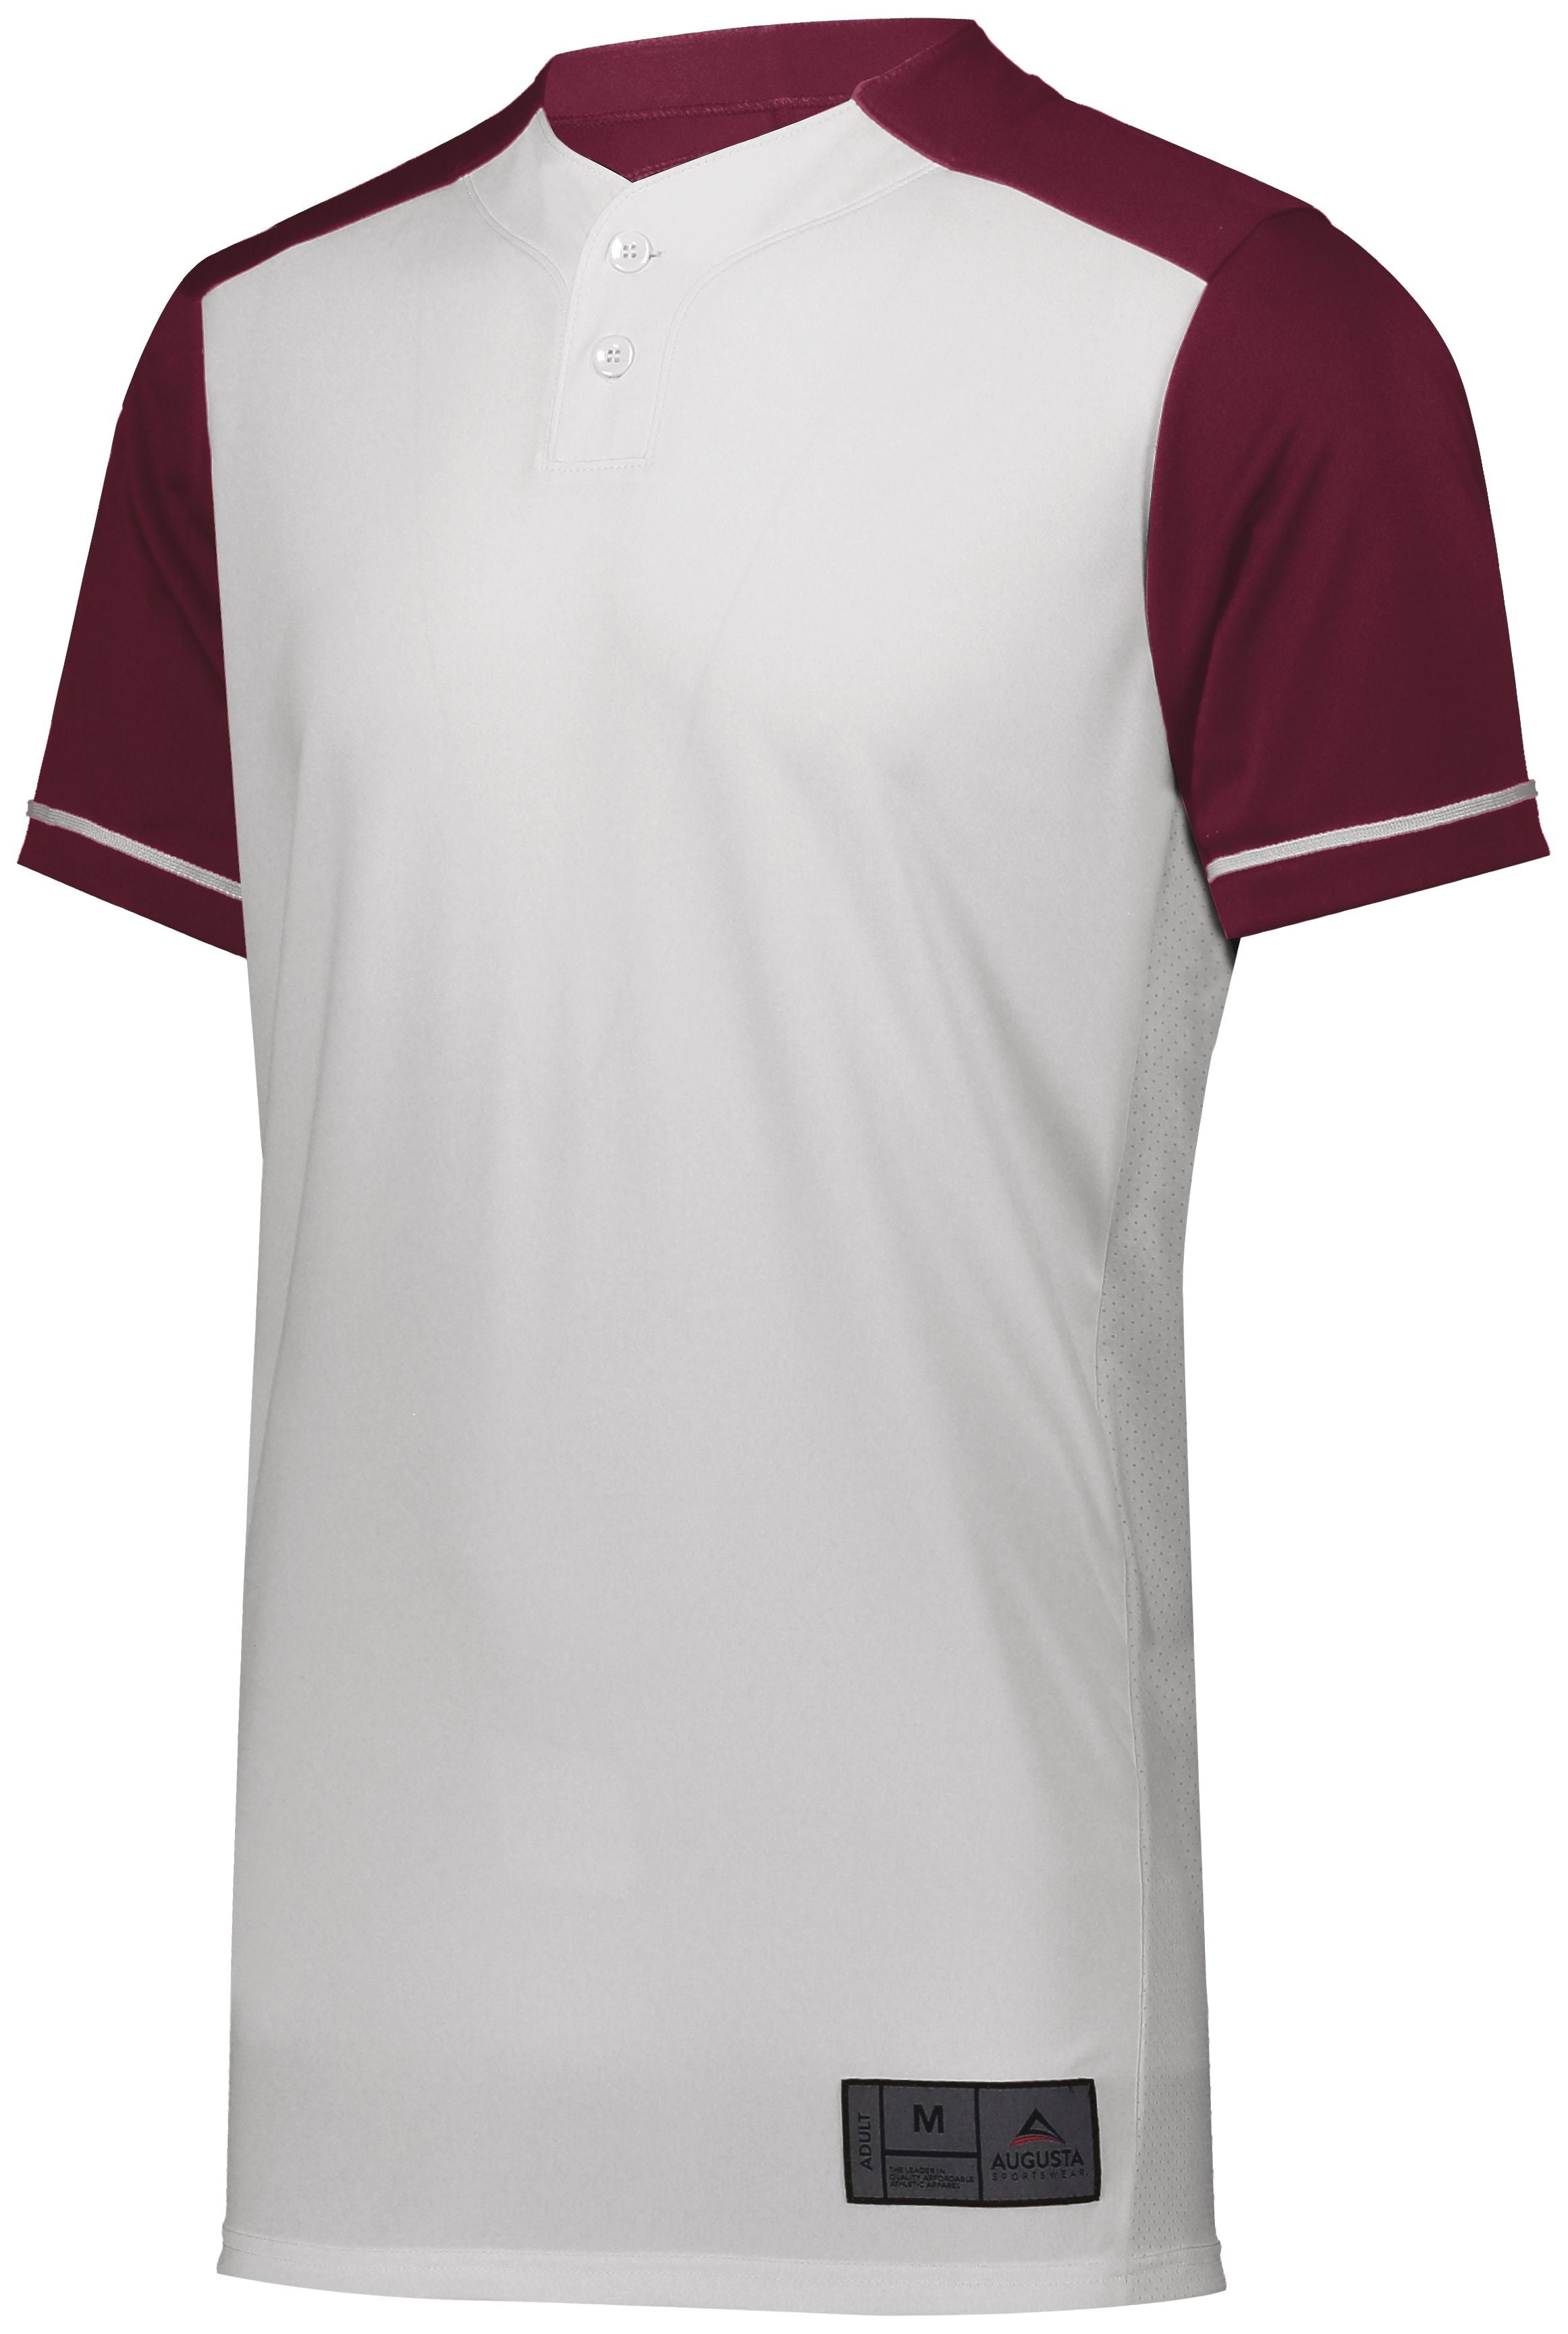 Augusta Sportswear Youth Closer Jersey in White/Maroon  -Part of the Youth, Youth-Jersey, Augusta-Products, Baseball, Shirts, All-Sports, All-Sports-1 product lines at KanaleyCreations.com